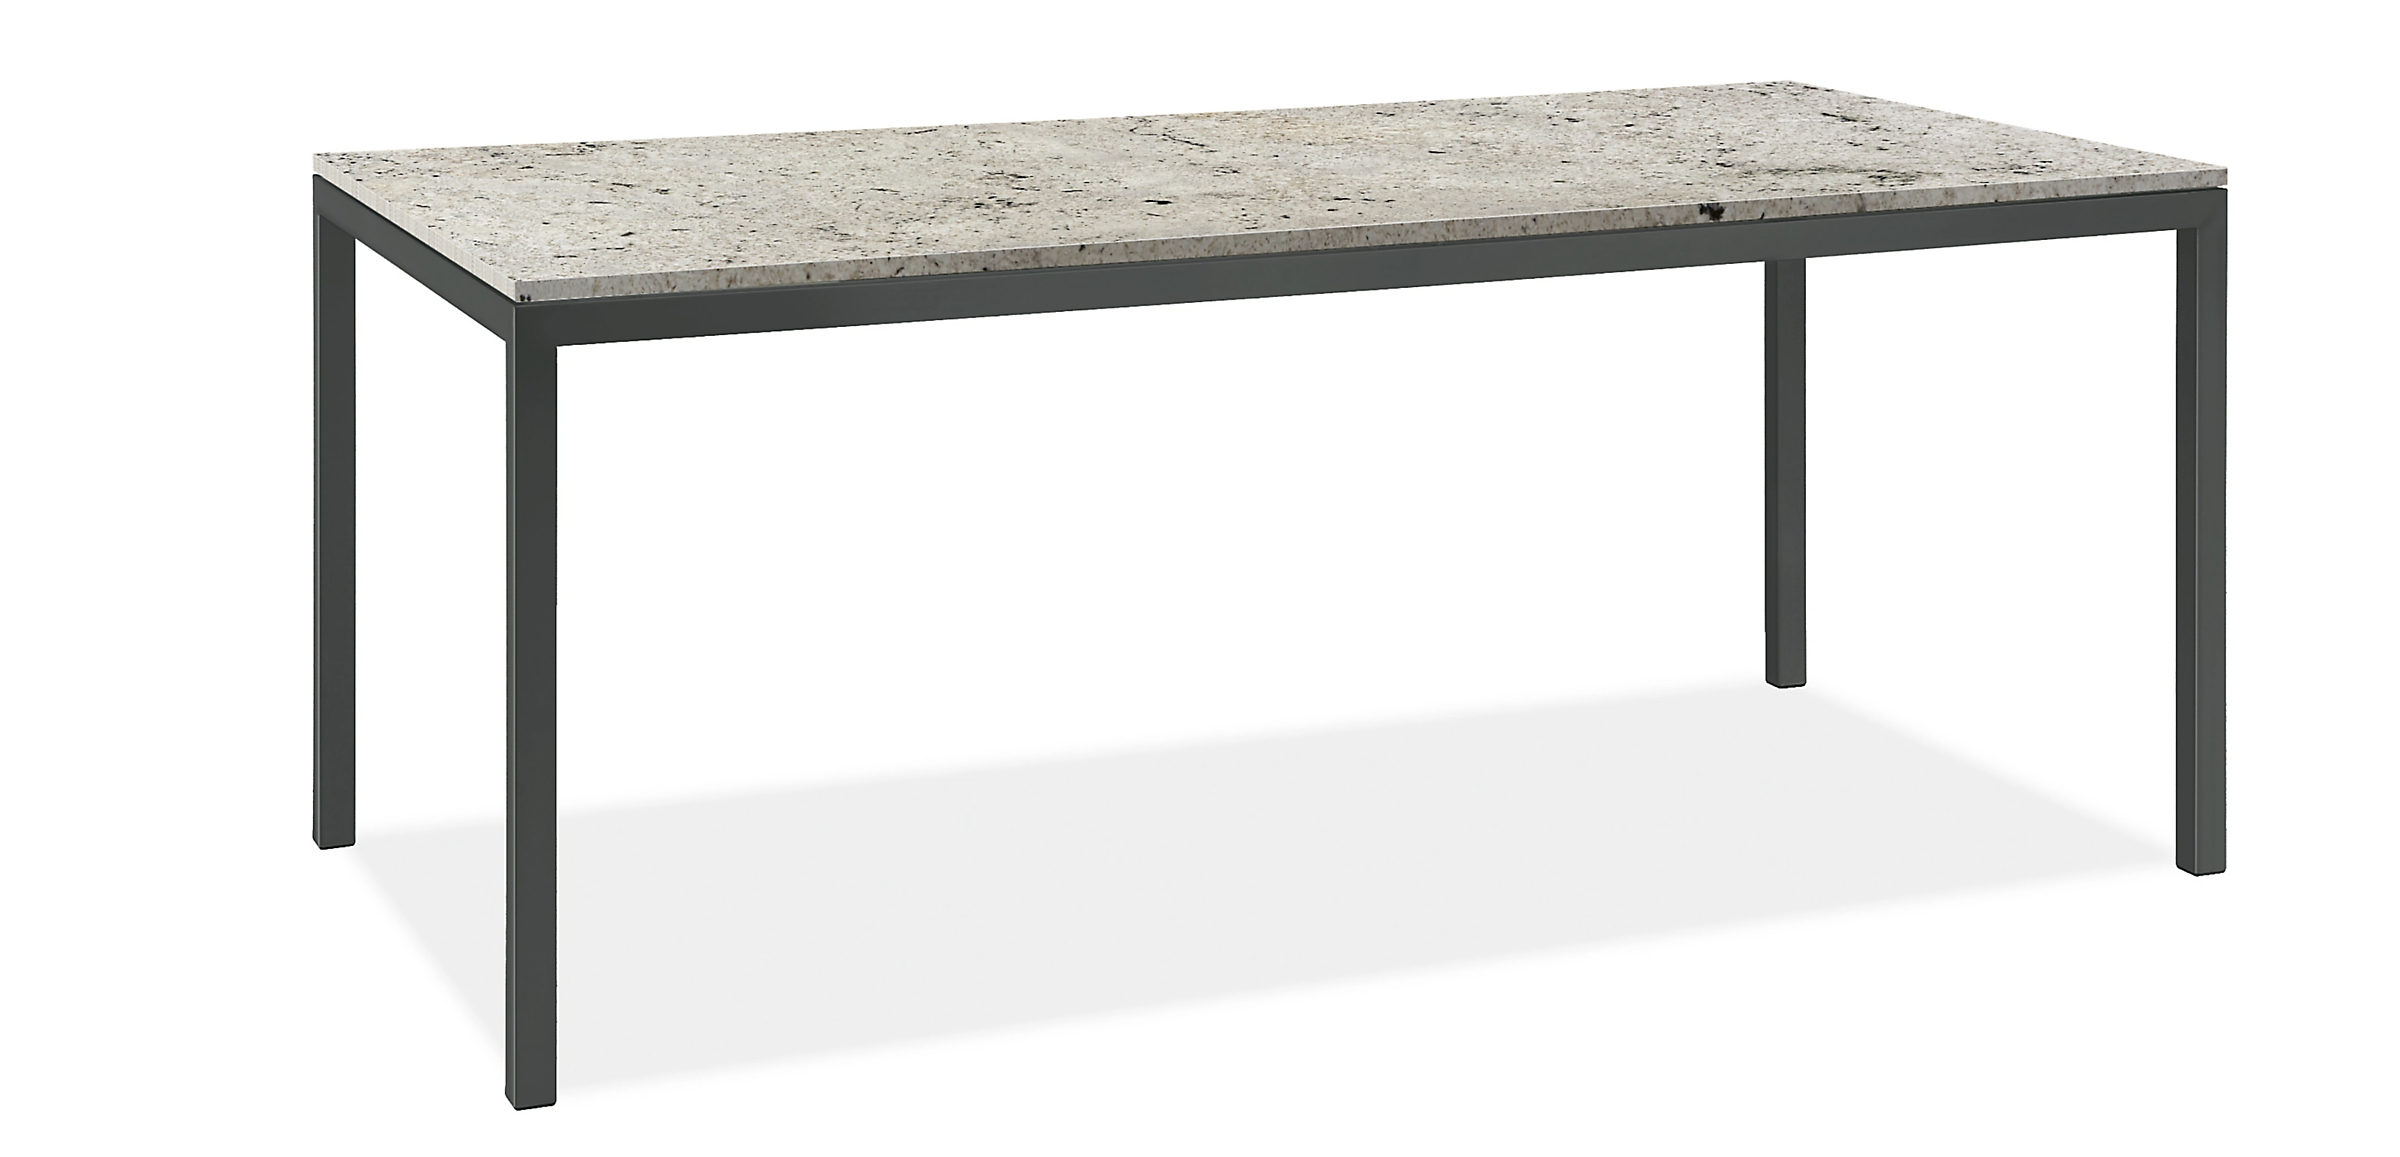 Parsons 76w 36d 29h Dining Table w/1.5" Graphite Base and Mayfair White Granite